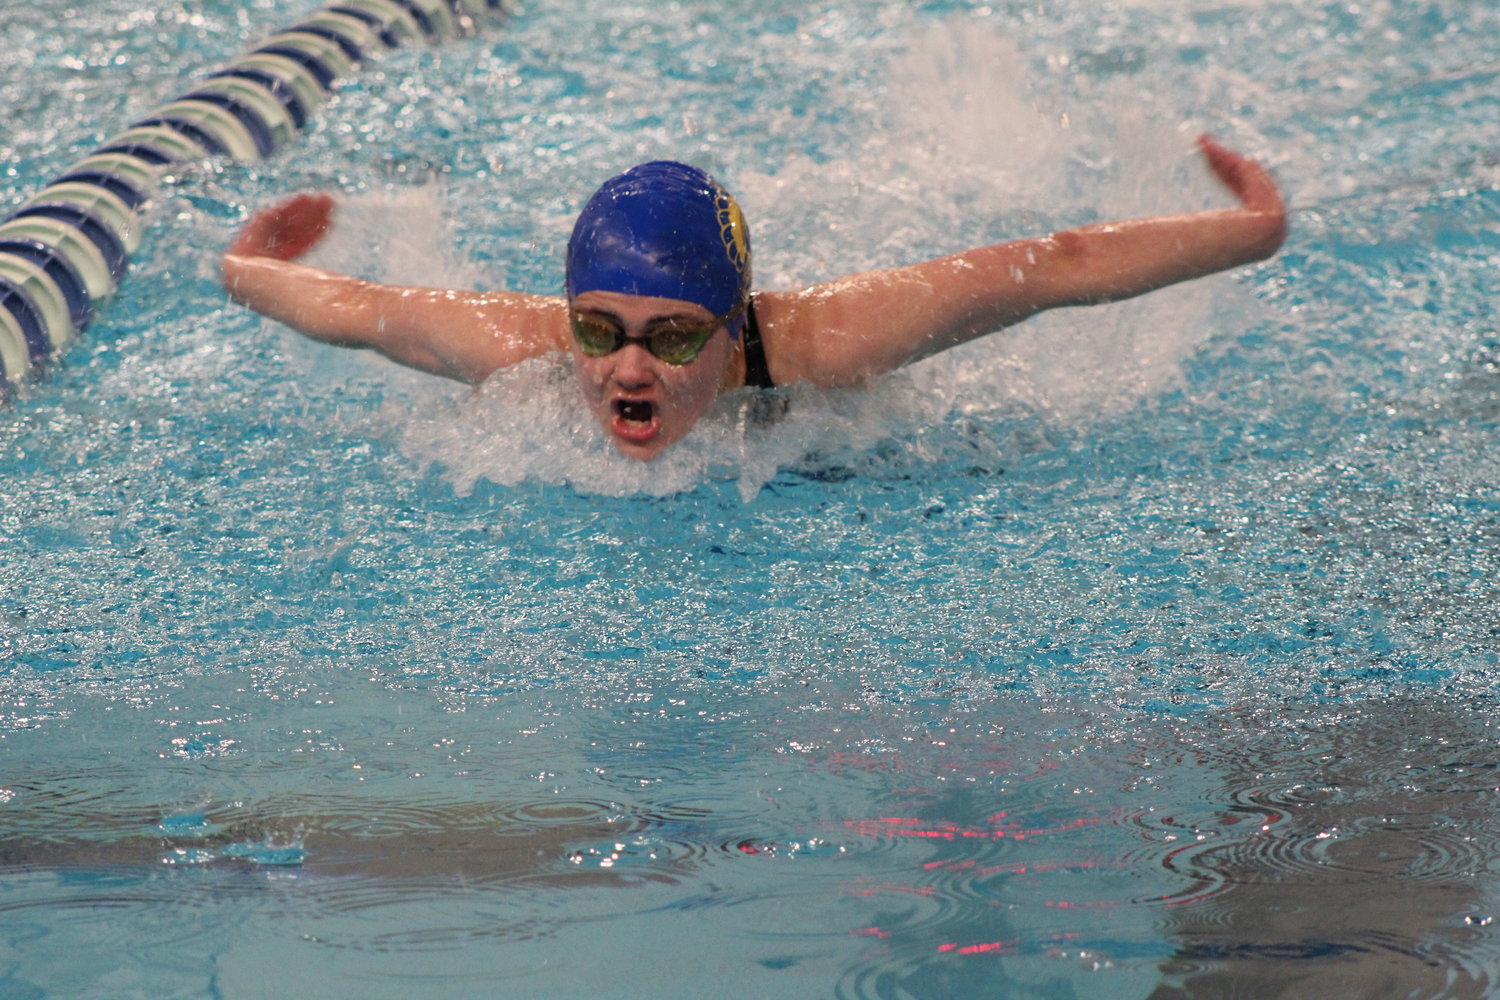 Sophia Melevage is one of many talented freshman for the Athenians. Now she’ll be competing in the State Finals on Friday after being named the sectional champion in the 100 butterfly.